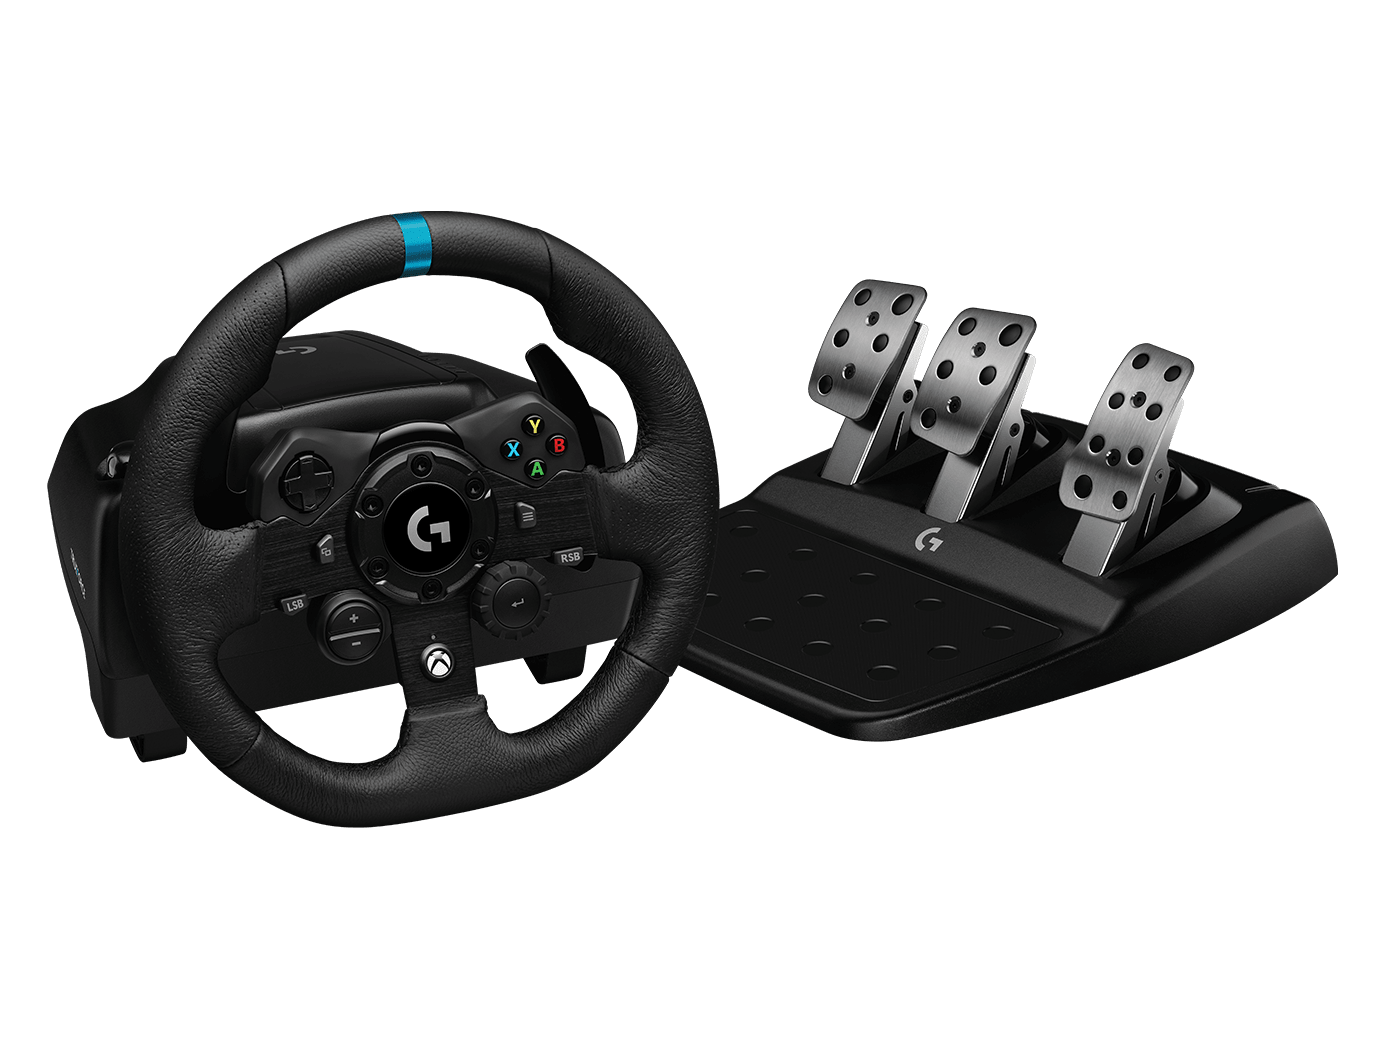 Logitech G923 Trueforce Racing Wheel + Pedals (Refubished) Xbox/PC or PS5/PC version $229 (stacks with $50 off $250 and $100 off $400) - with G502 X Lightspeed + Pro X Headset $307